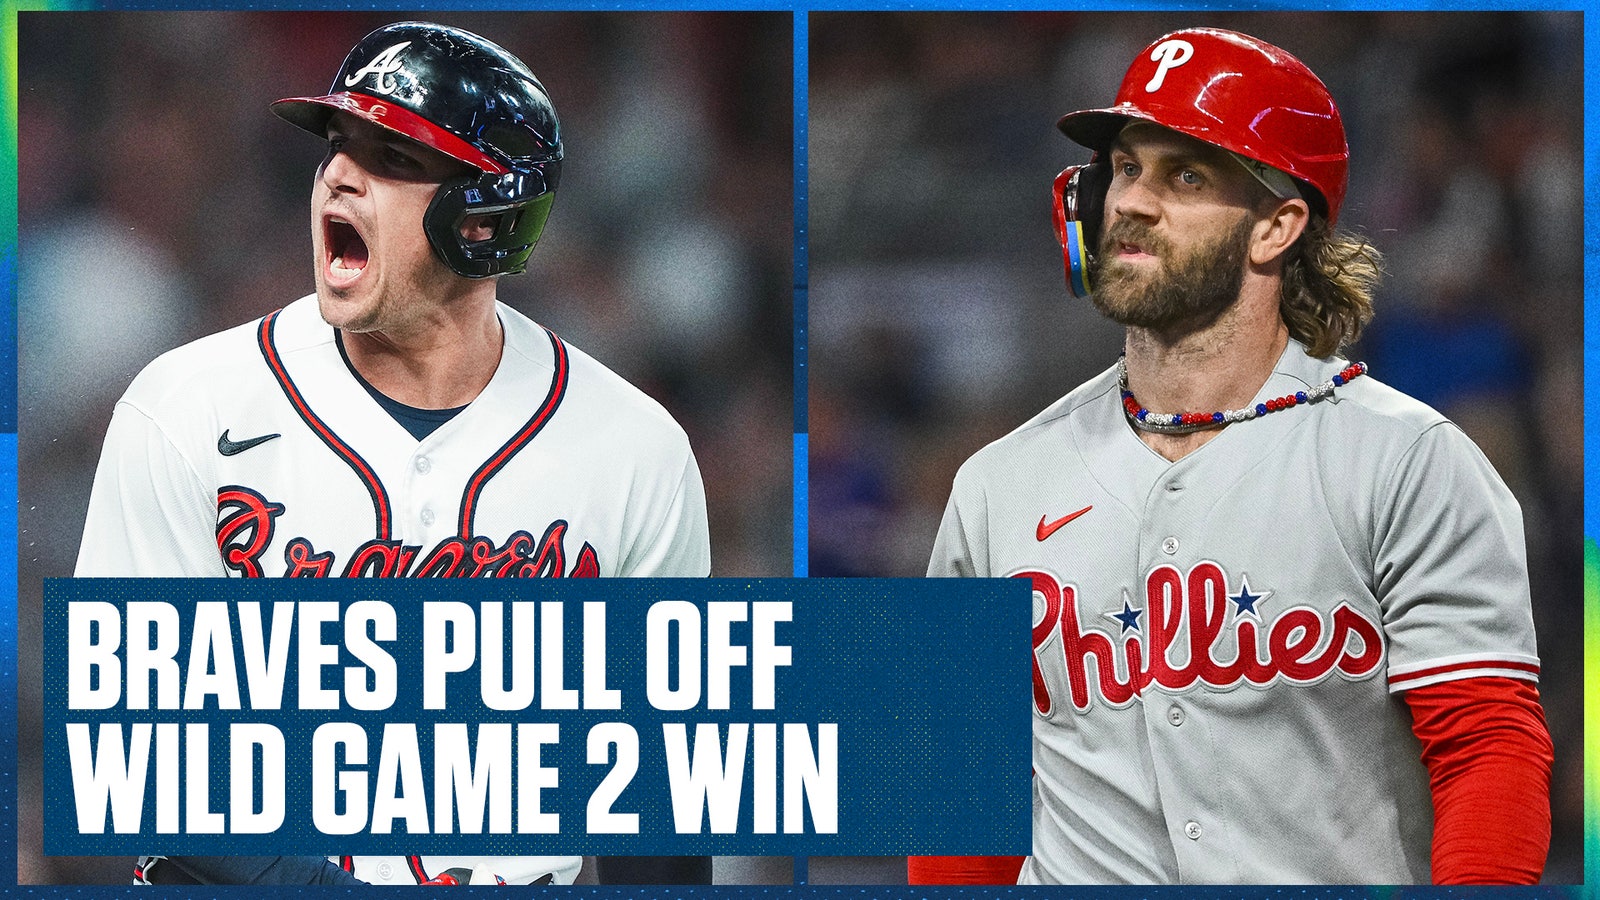 Atlanta Braves save their season with a WILD game 2 win over the Phillies